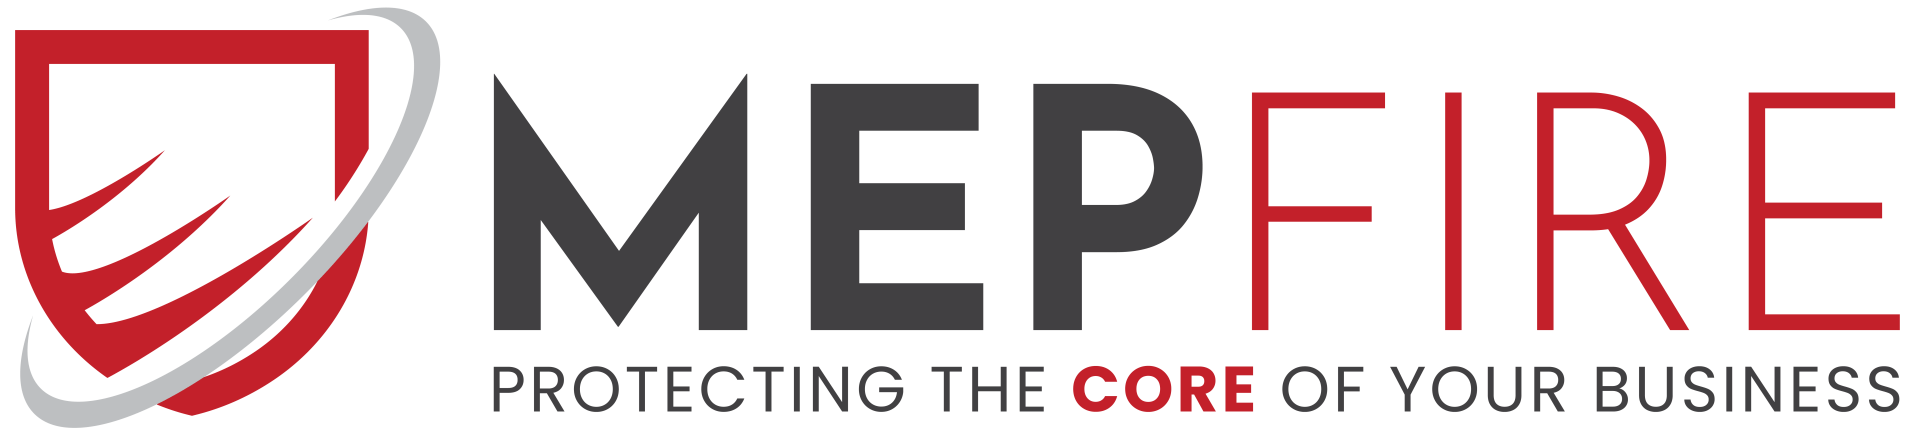 The logo for mepfire is protecting the core of your business.